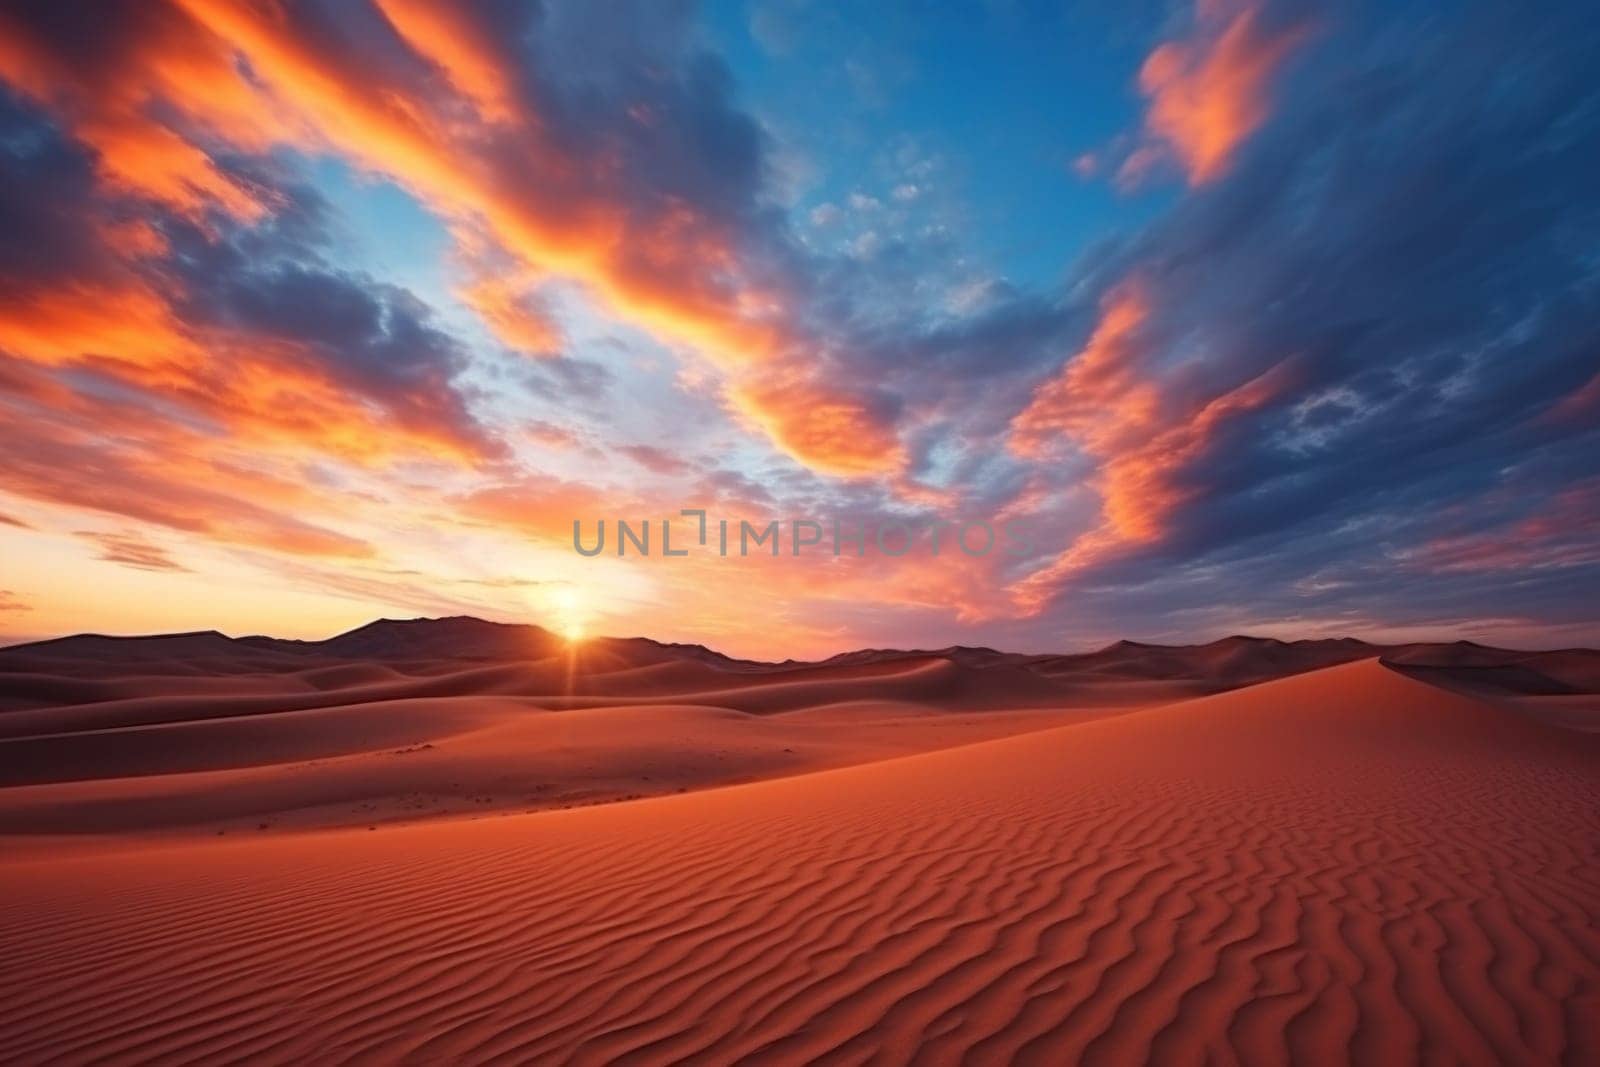 Sunset in the desert, Sand dunes with cloud sky background.